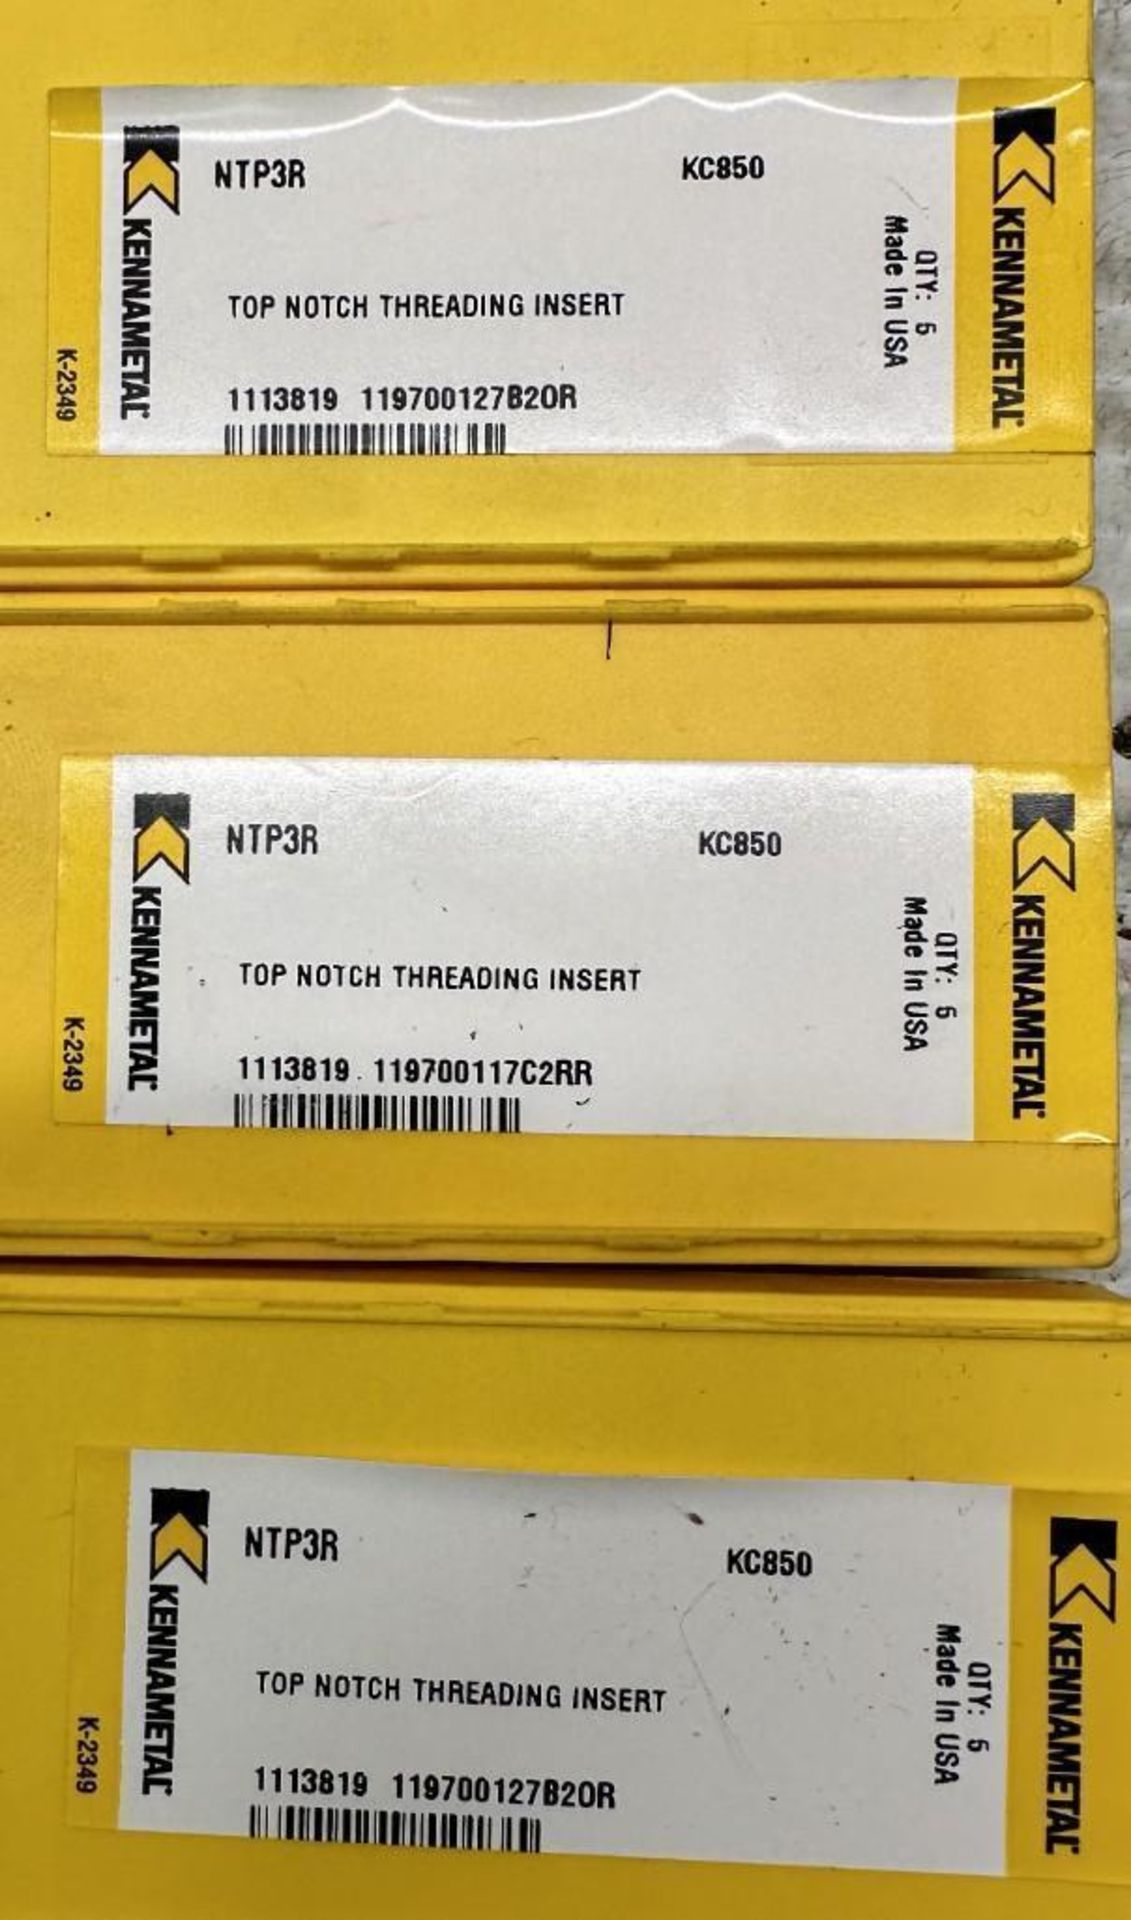 Lot of Kennametal #NTP3R Carbide Inserts - Image 3 of 3